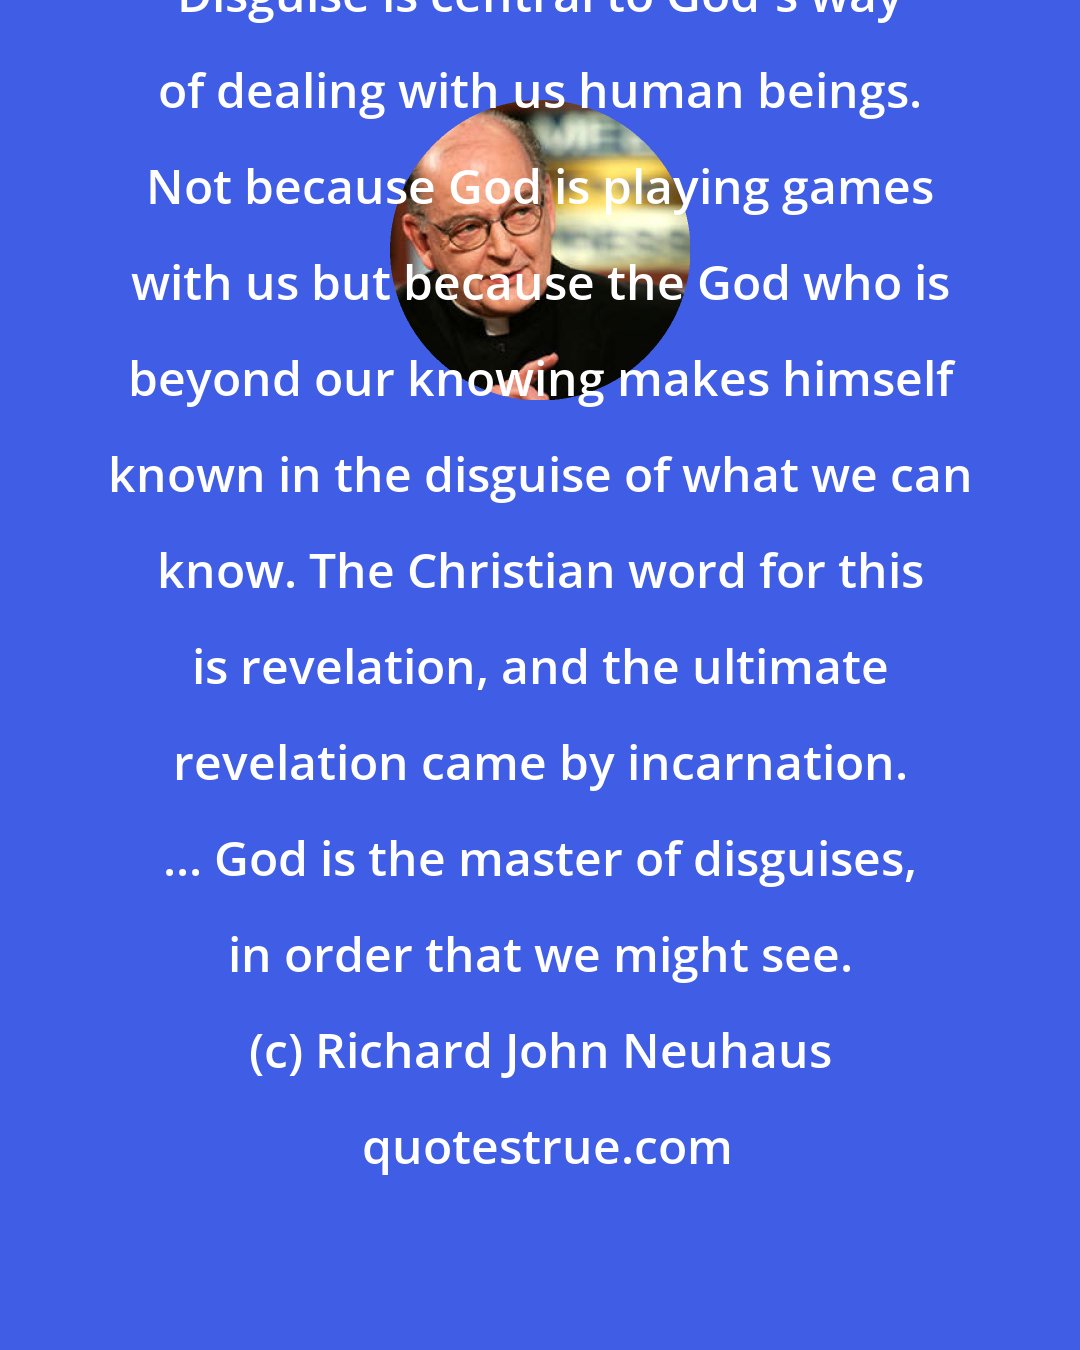 Richard John Neuhaus: Disguise is central to God's way of dealing with us human beings. Not because God is playing games with us but because the God who is beyond our knowing makes himself known in the disguise of what we can know. The Christian word for this is revelation, and the ultimate revelation came by incarnation. ... God is the master of disguises, in order that we might see.